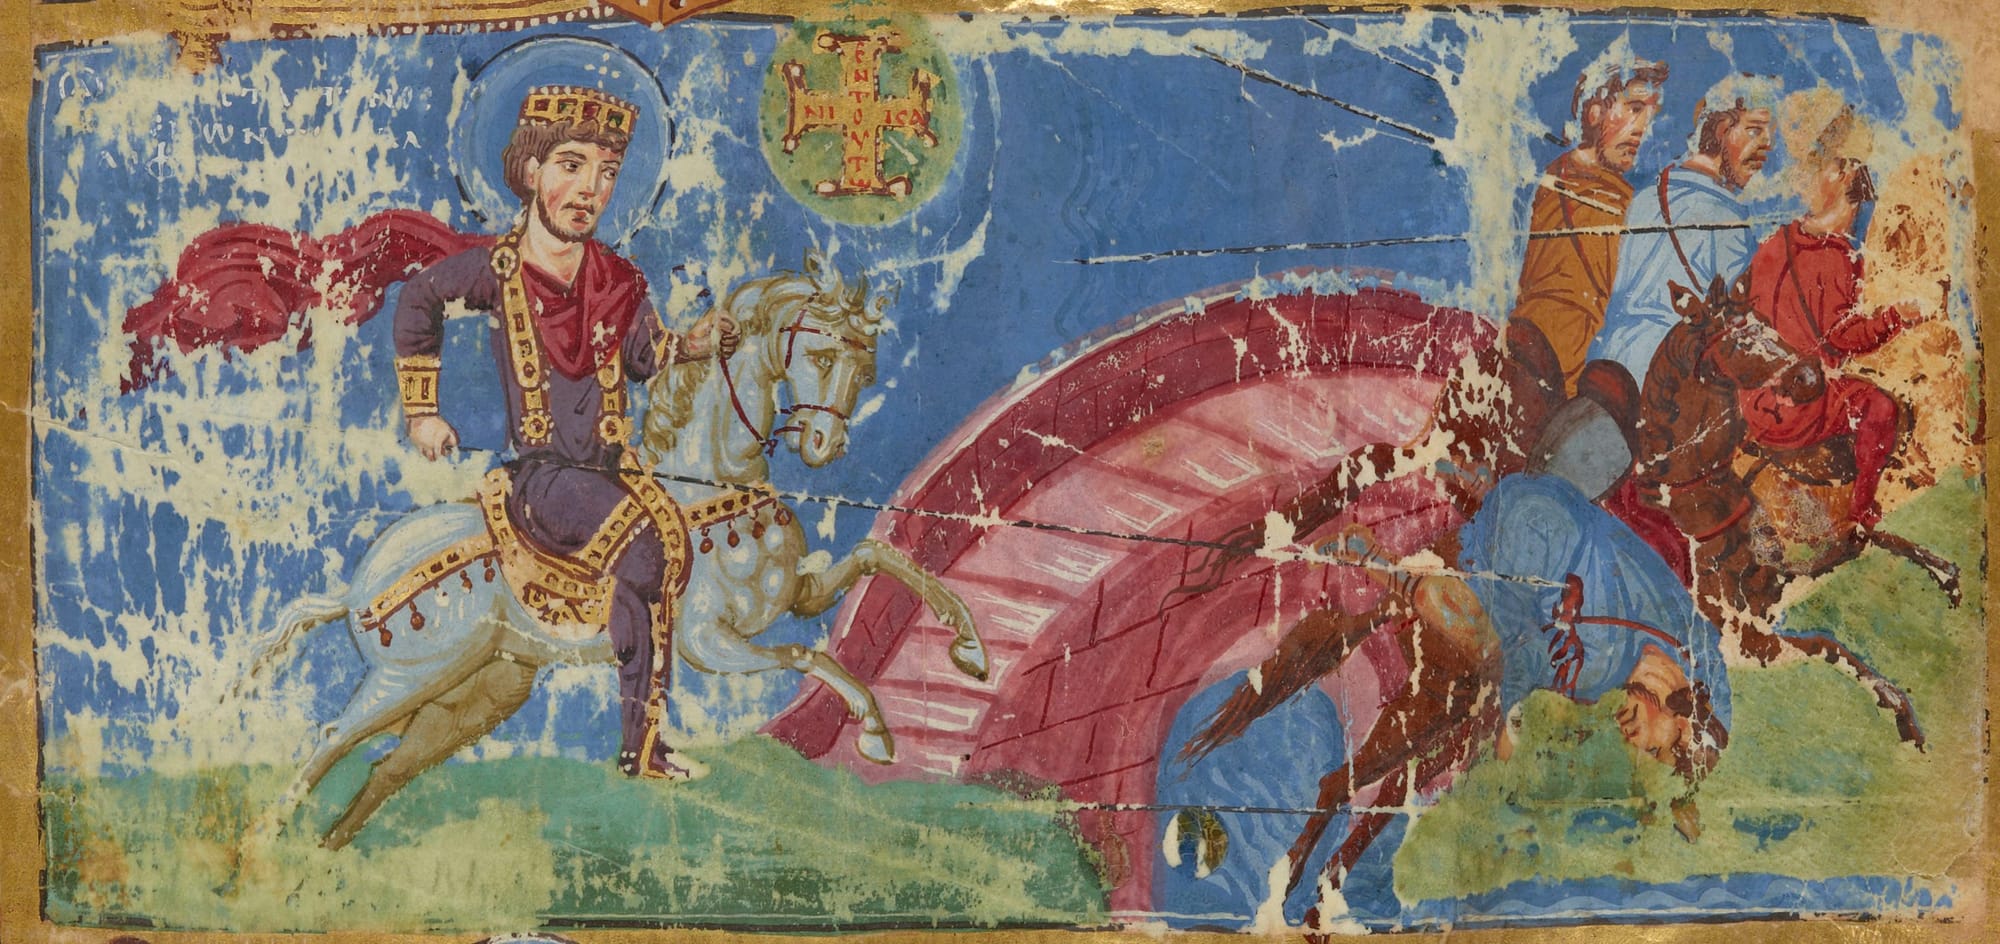 Detail from a 9th-century Byzantine manuscript. Constantine defeats Maxentius at the Milvian Bridge